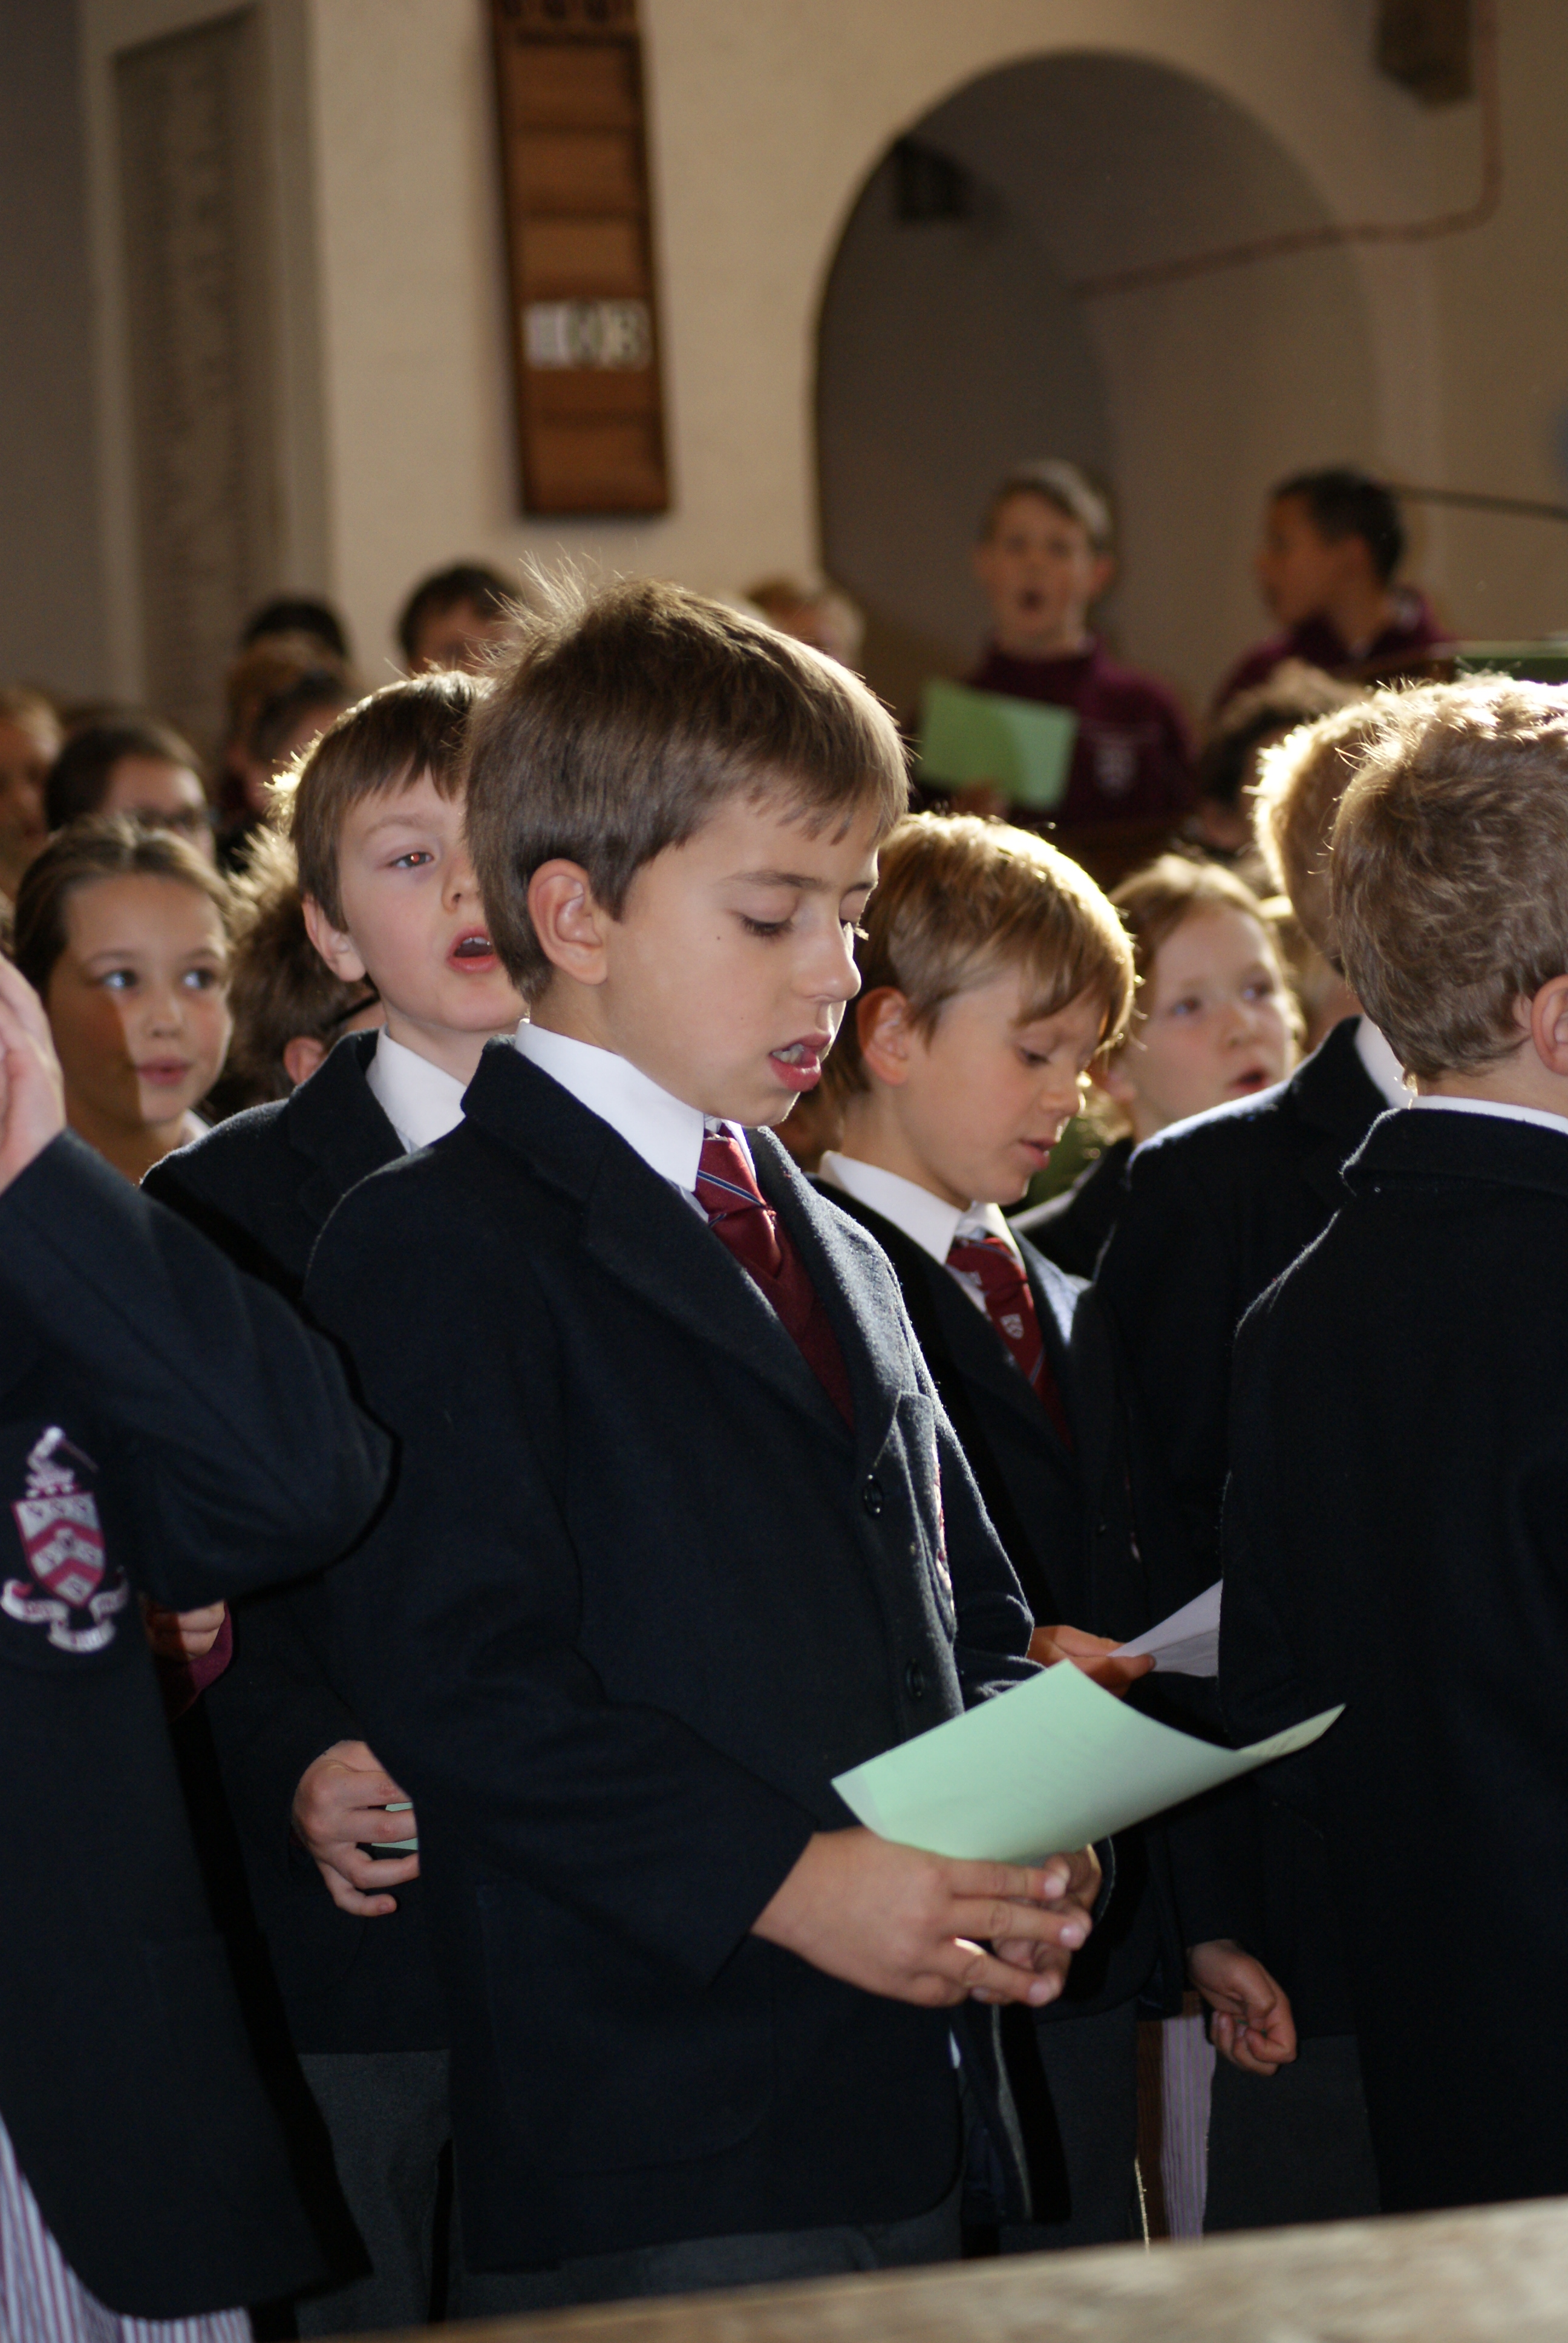 Over 100 voices from all of the Prep Choirs came together to record their carol